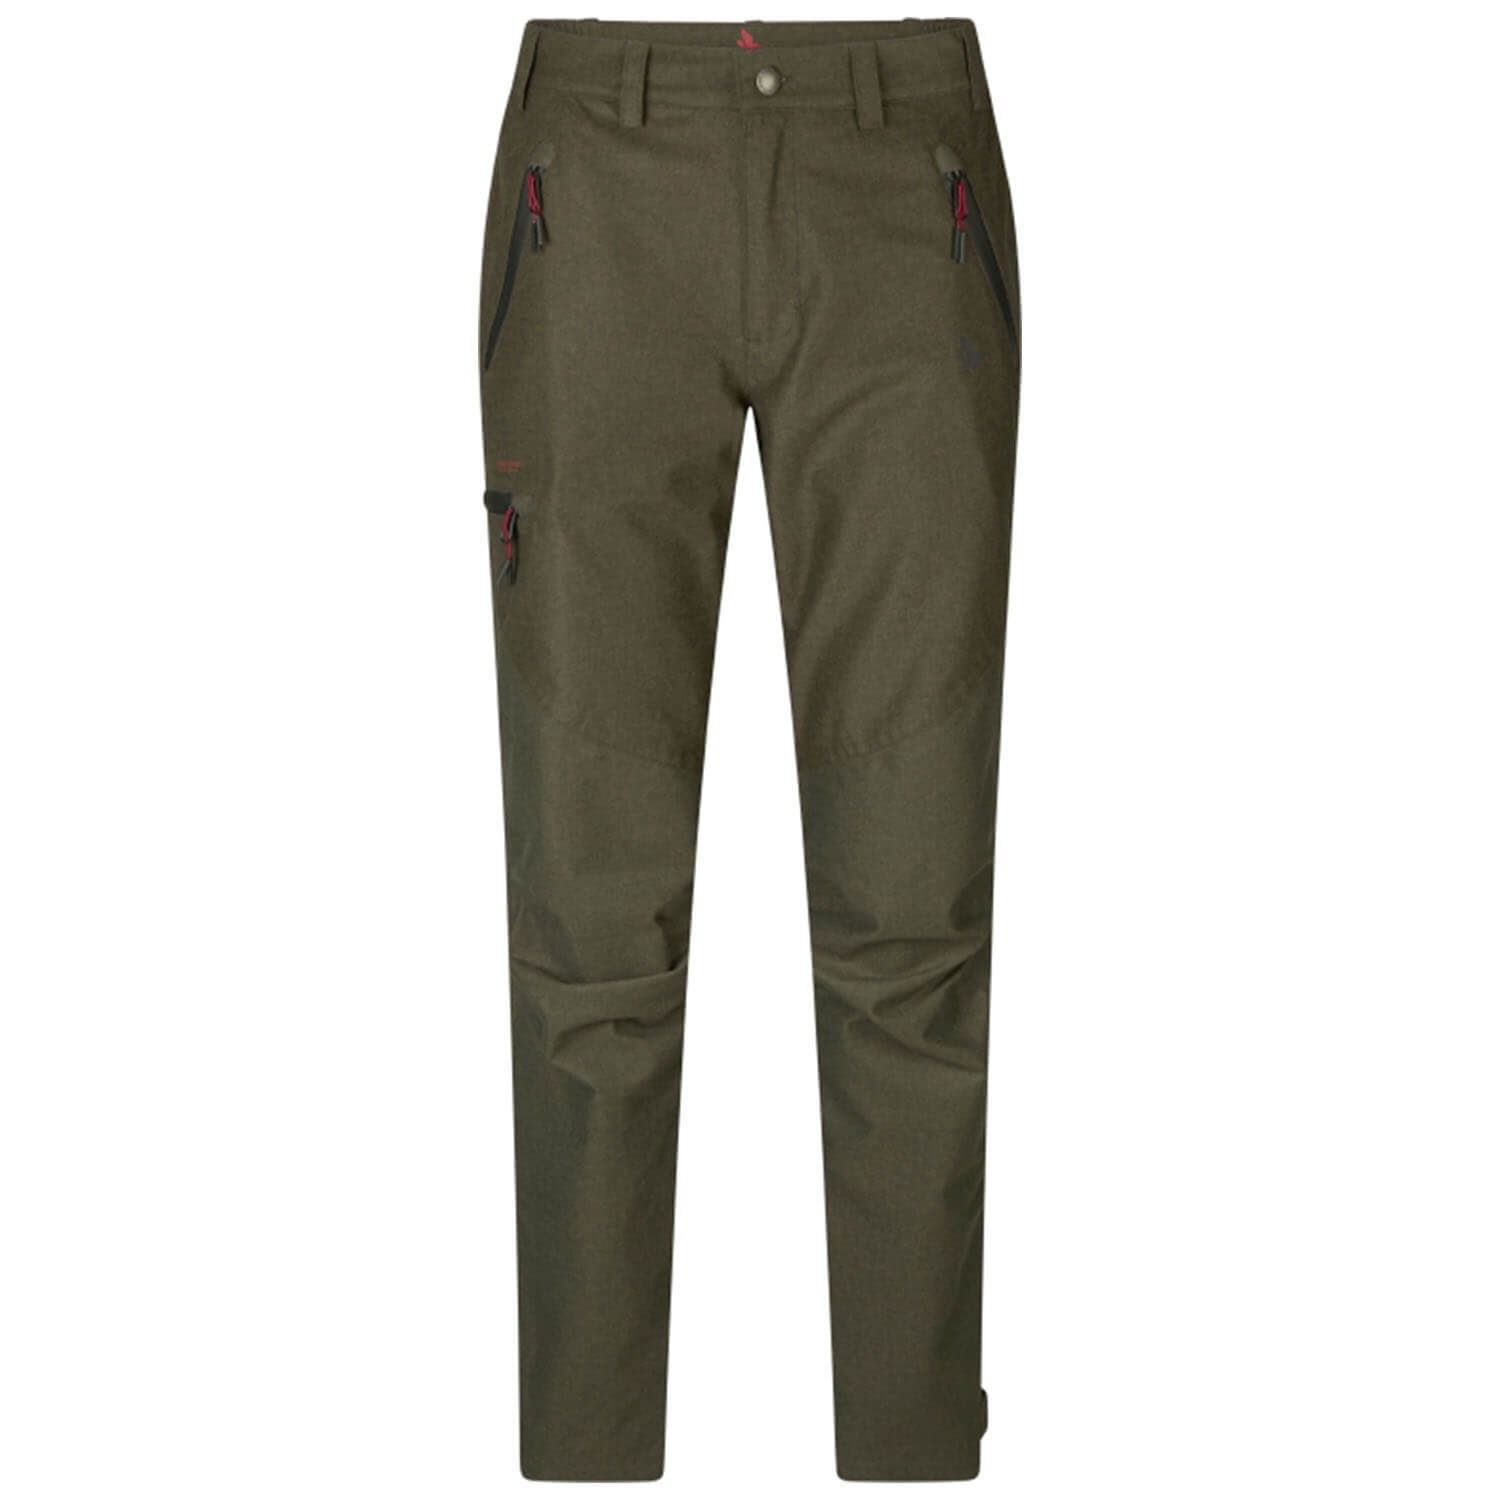 Seeland ladys hunting pants avail (pine green melange) - Hunting Trousers